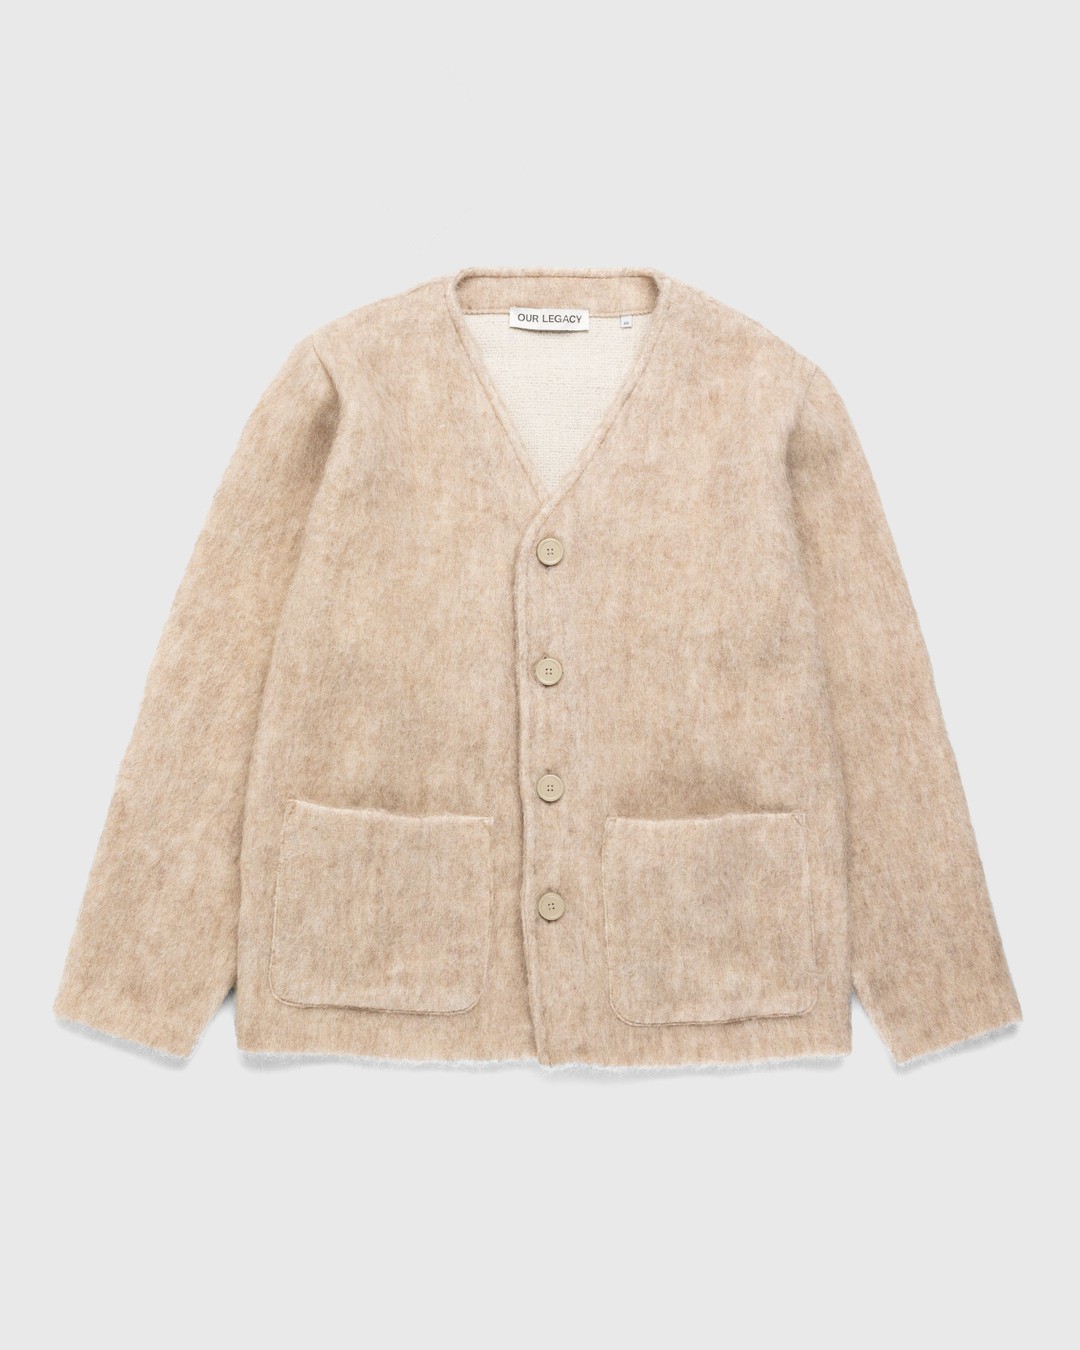 Our Legacy – Mohair Cardigan Antique White | Highsnobiety Shop